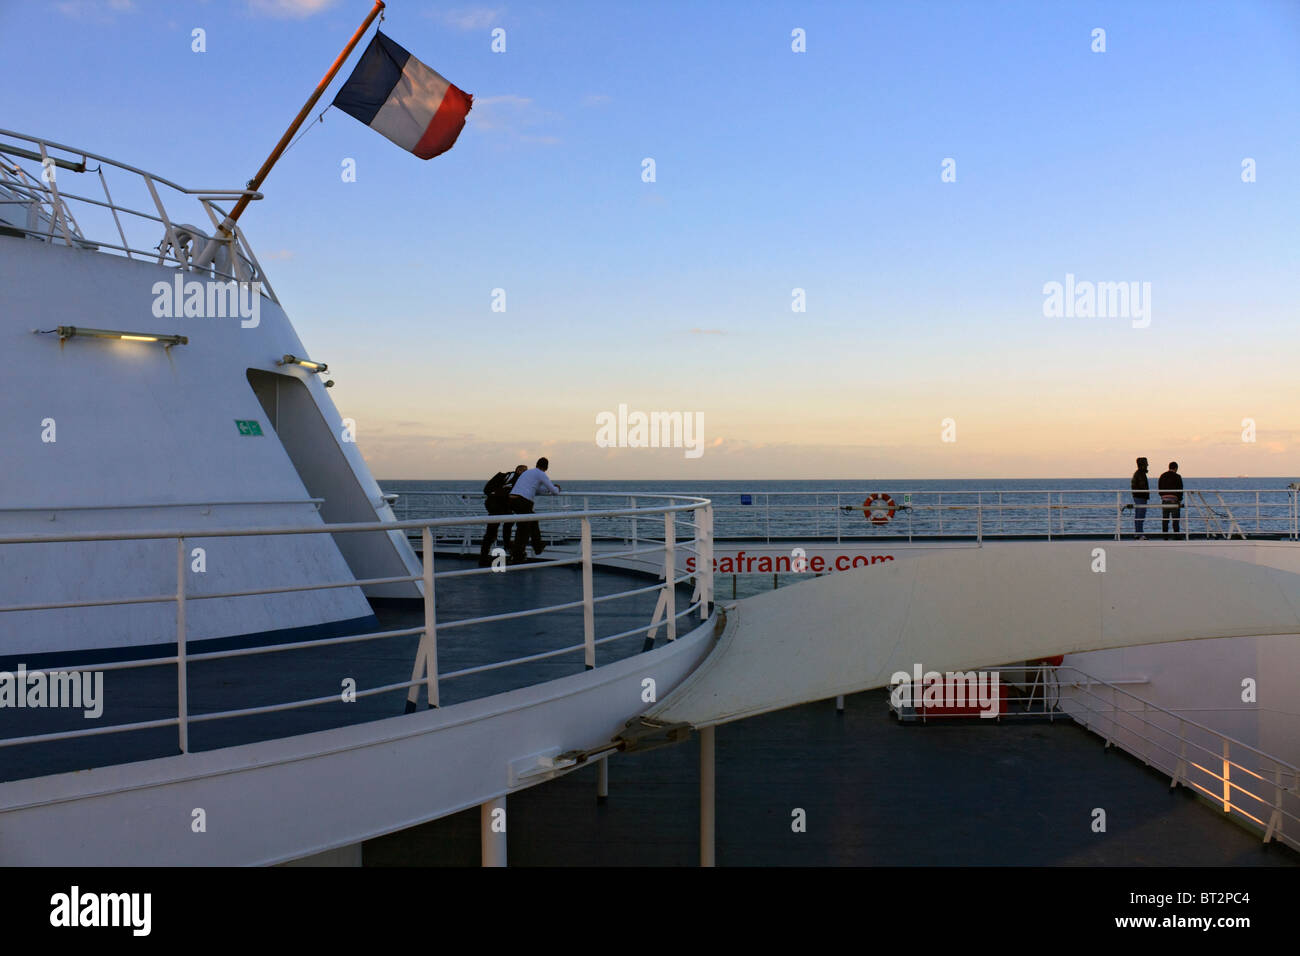 Sunset on board Sea France ferry coming into port of Dover after crossing the English Channel from Calais. Stock Photo